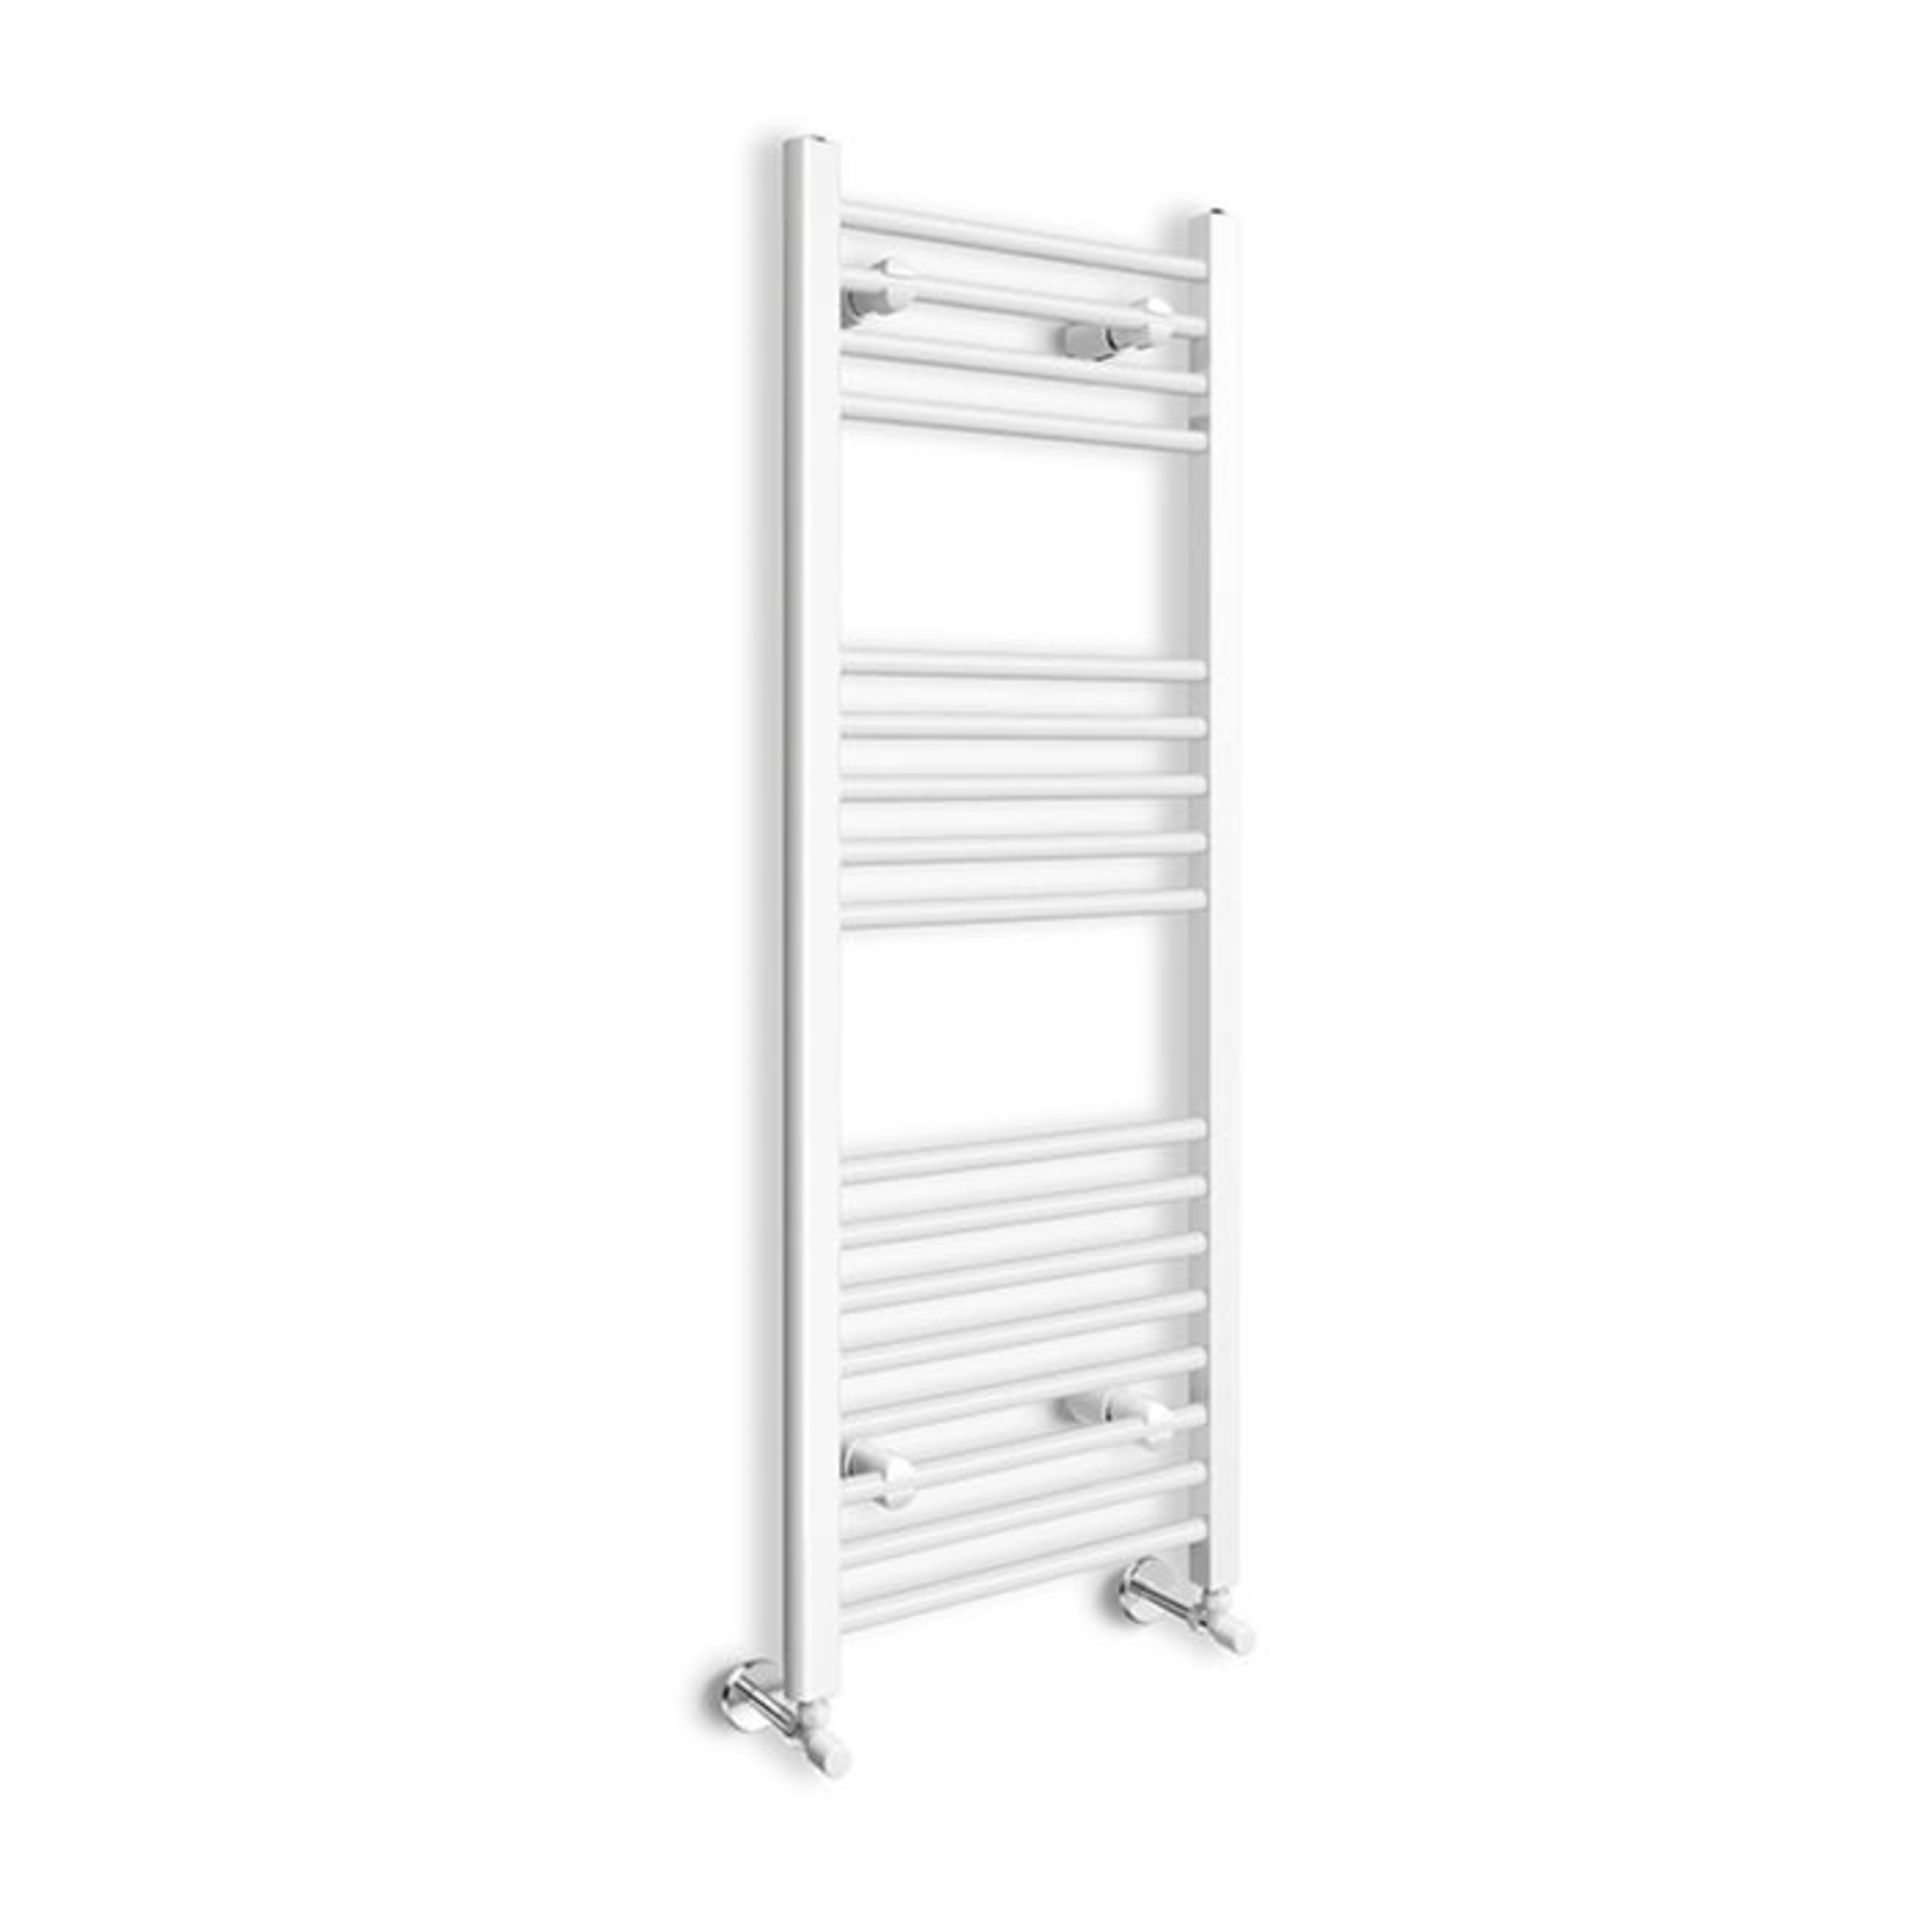 (LL126) 1100x500mm White Matt Heated Towel Radiator. RRP £129.99. Made from low carbon steel - Image 2 of 2